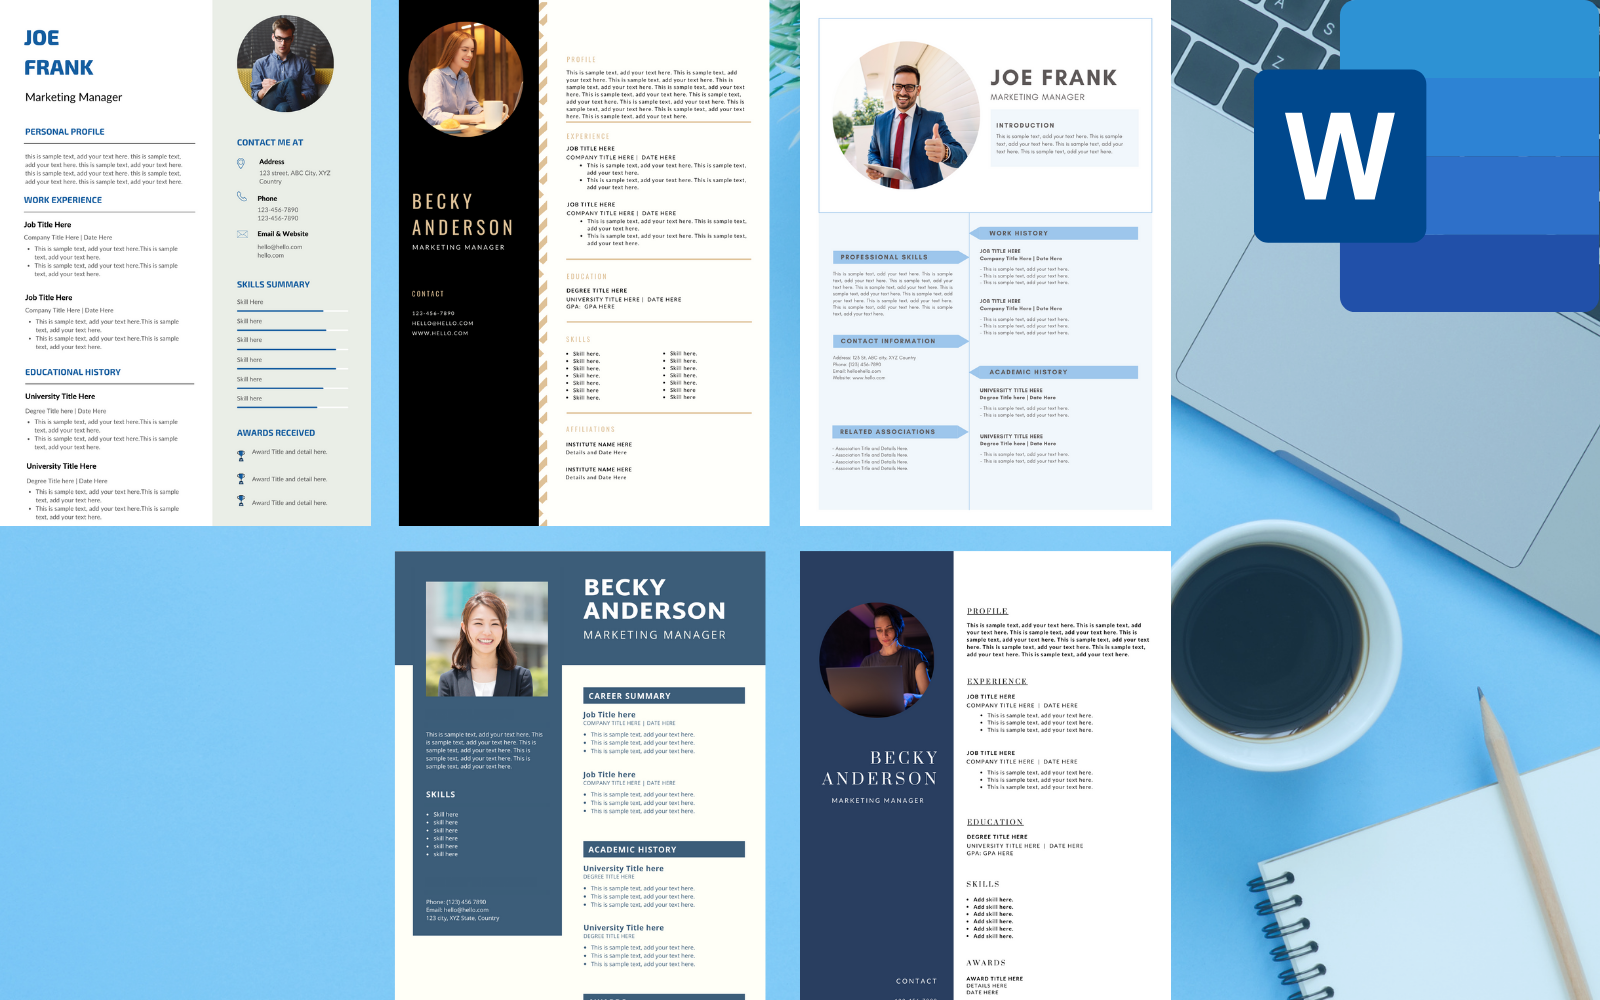 Pack of 5 Resume Templates for Marketing Manager - Microsoft word CV RESUME Format.